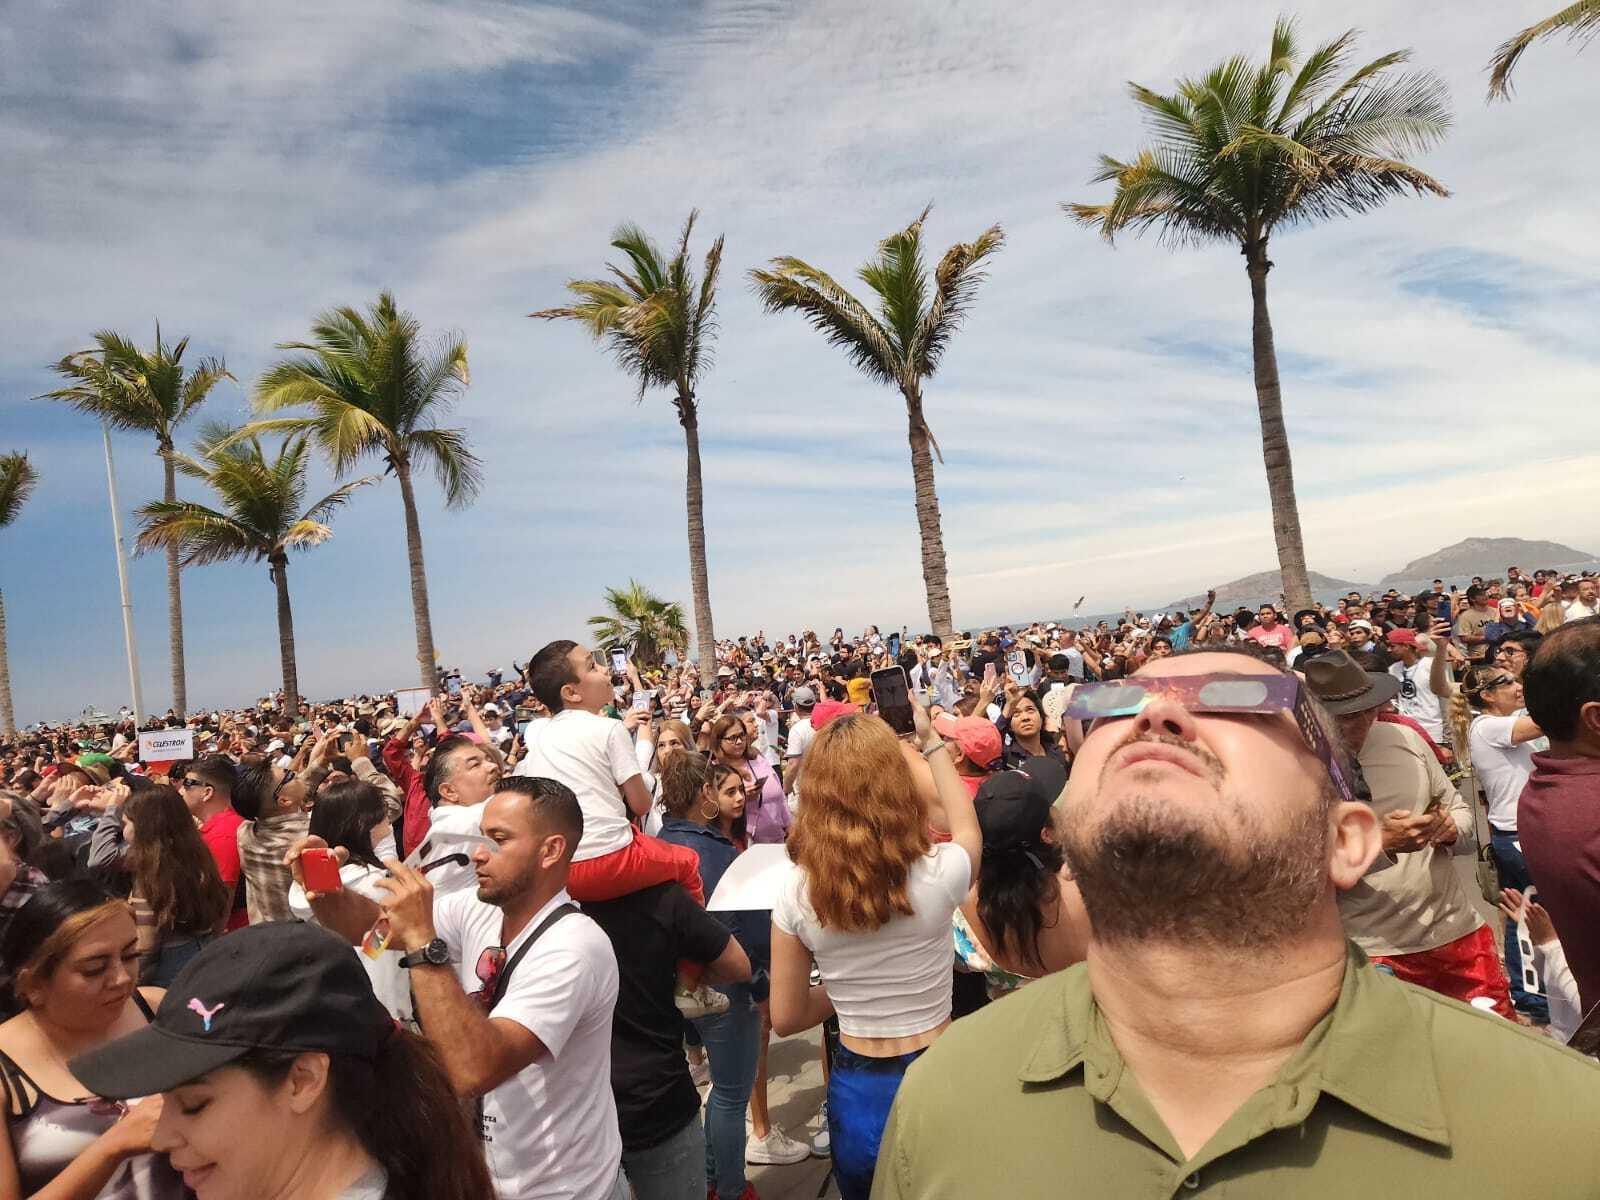 Many international tourists came to view the total solar eclipse, including scientists from around the world.